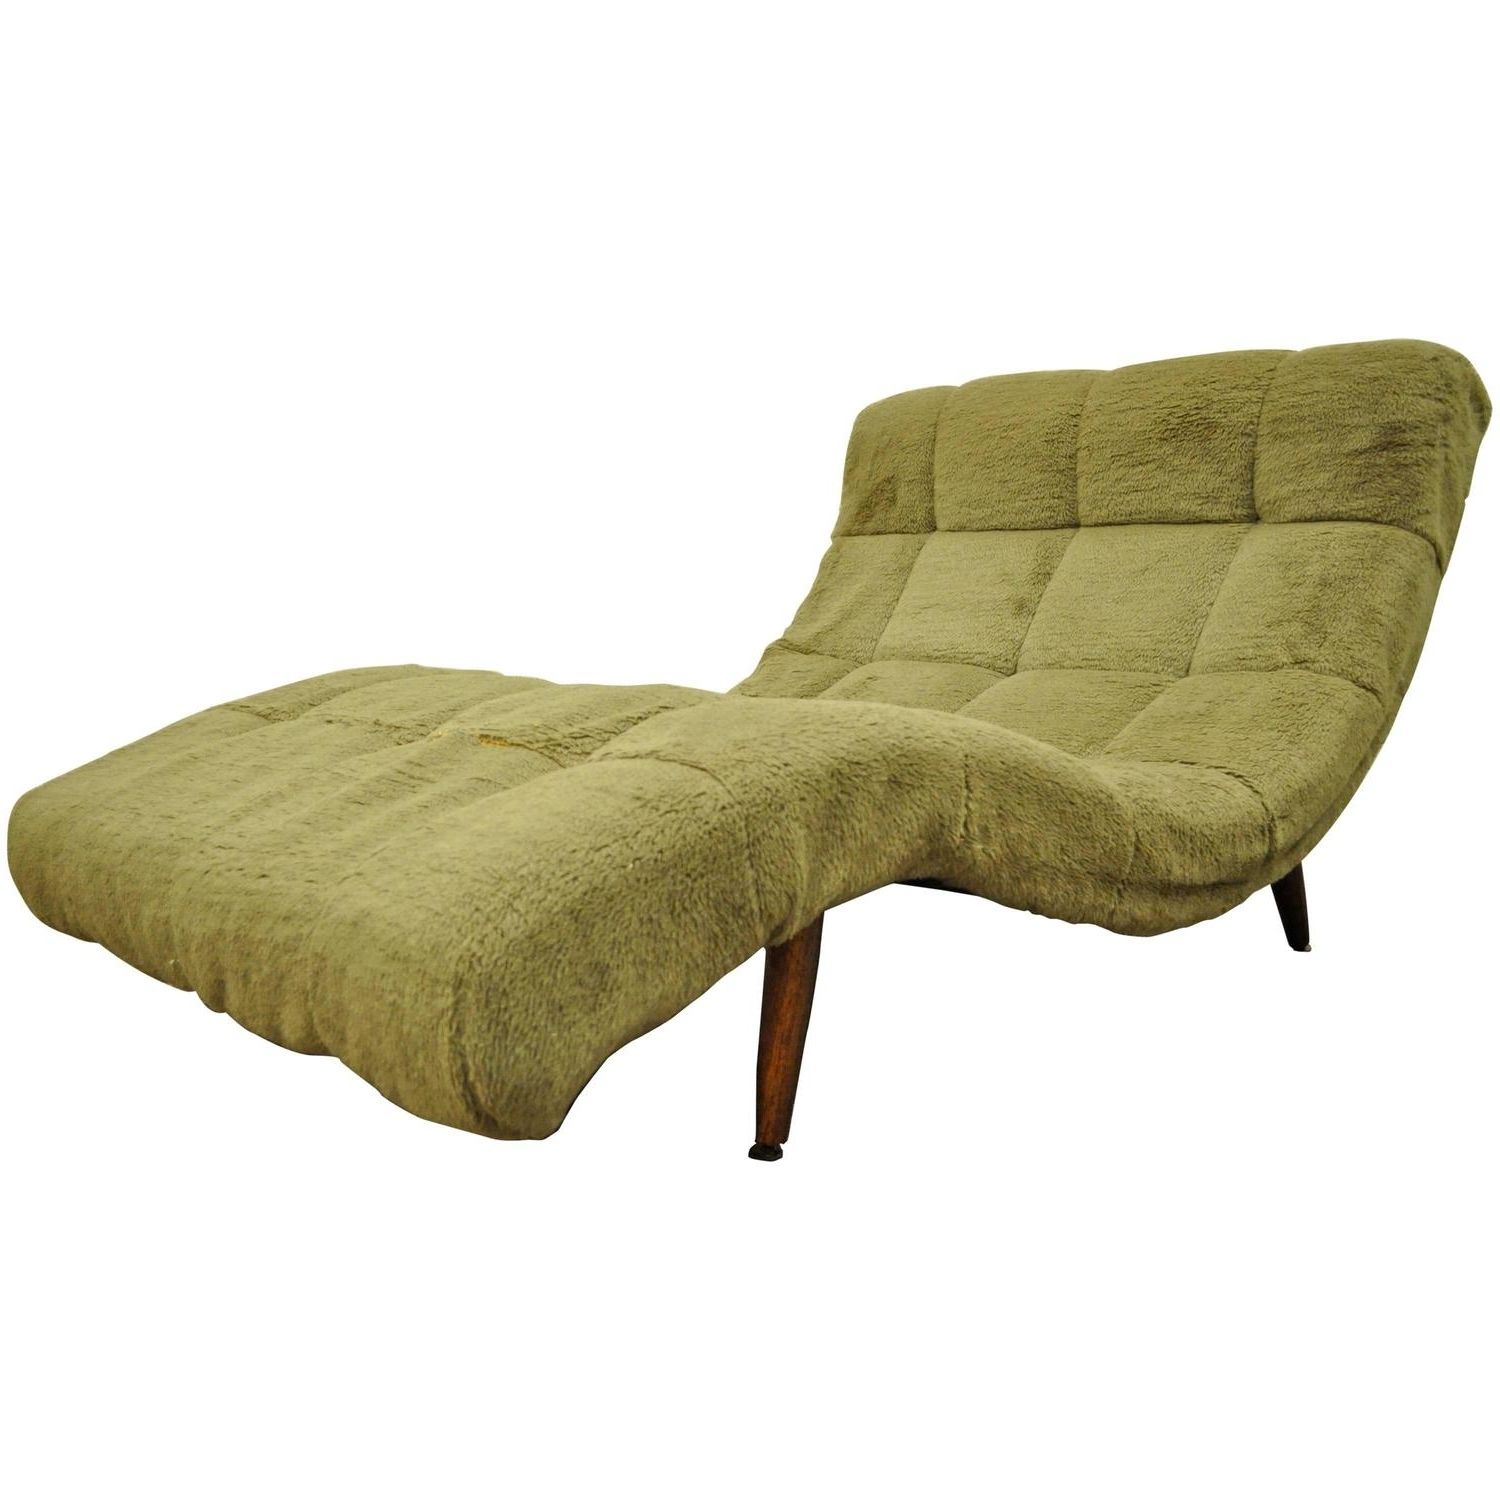 Favorite Midcentury Curved Chaise Lounge Chair Attributed To Adrian Within Curved Chaise Lounges (View 8 of 15)